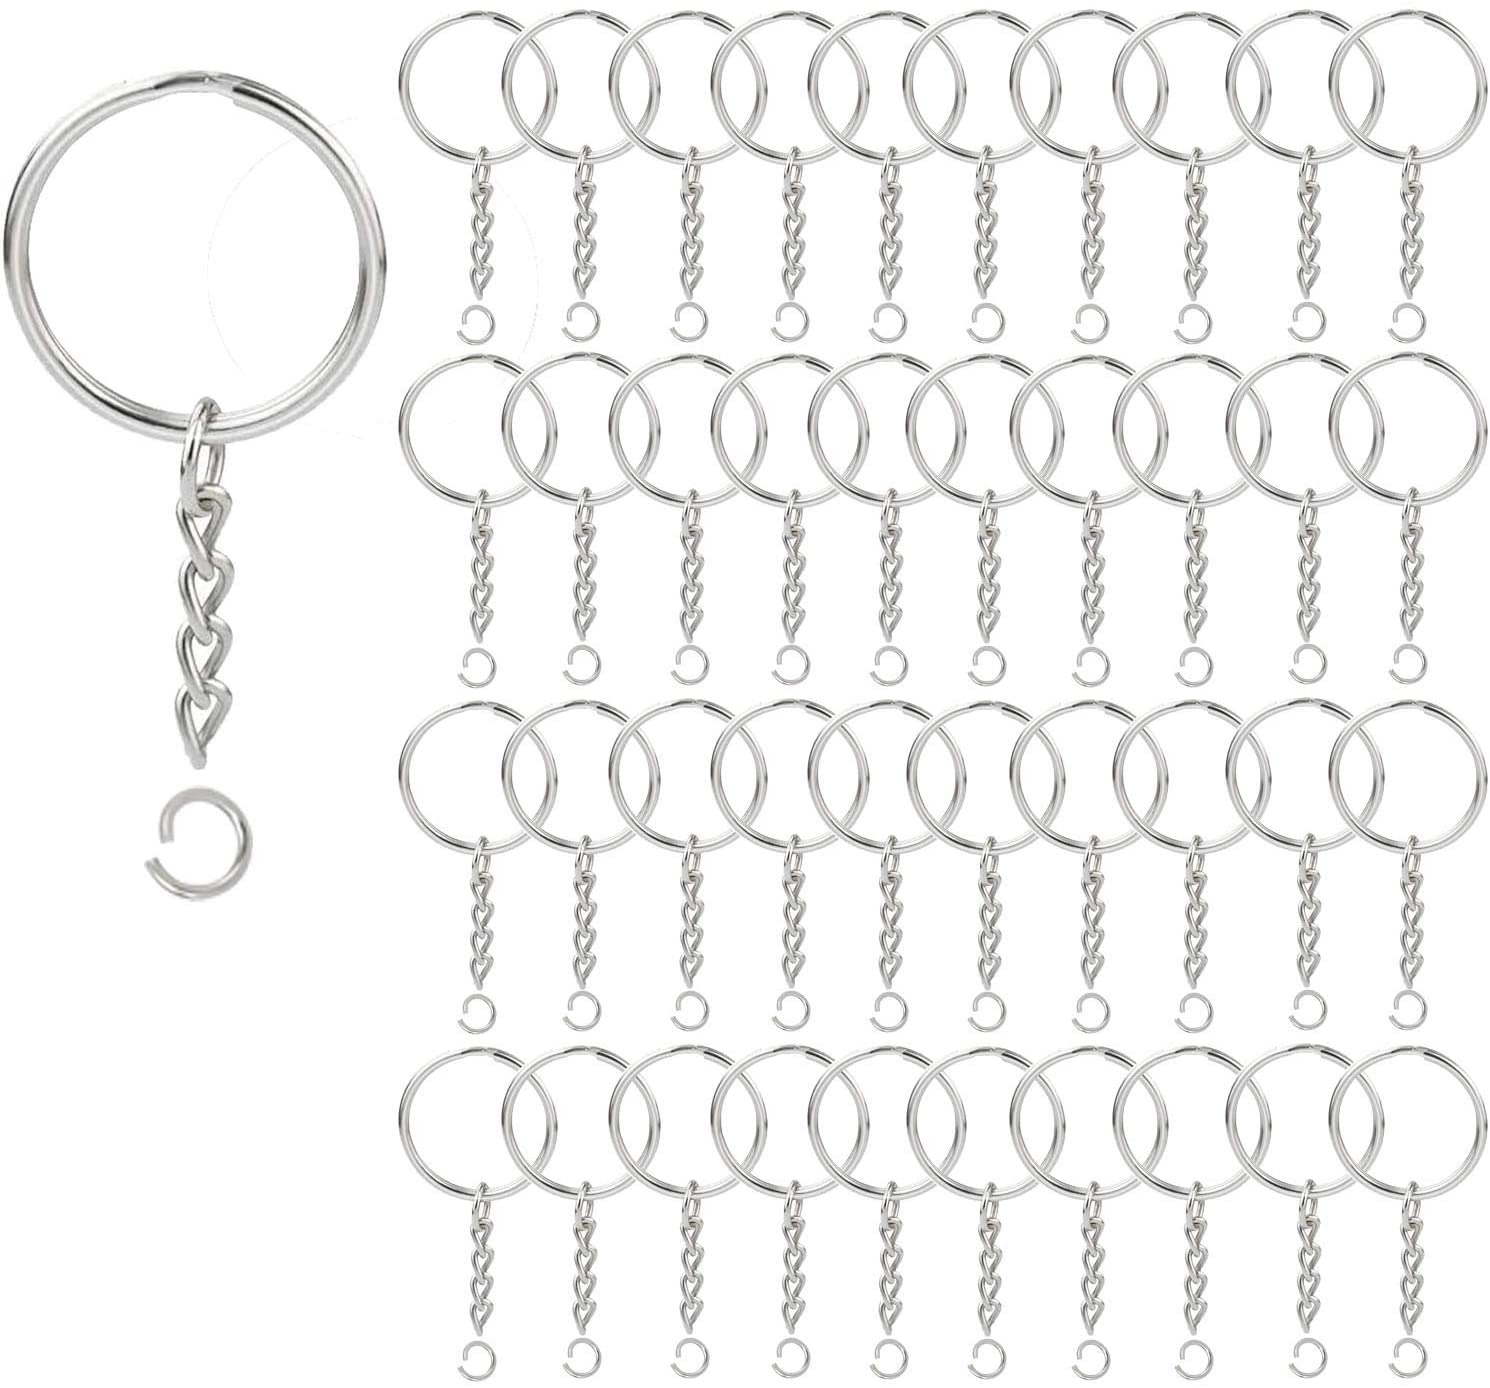 100 Pack Key Ring with Chain and Open Jump,1 Inch Split round Keychain Rings Bul